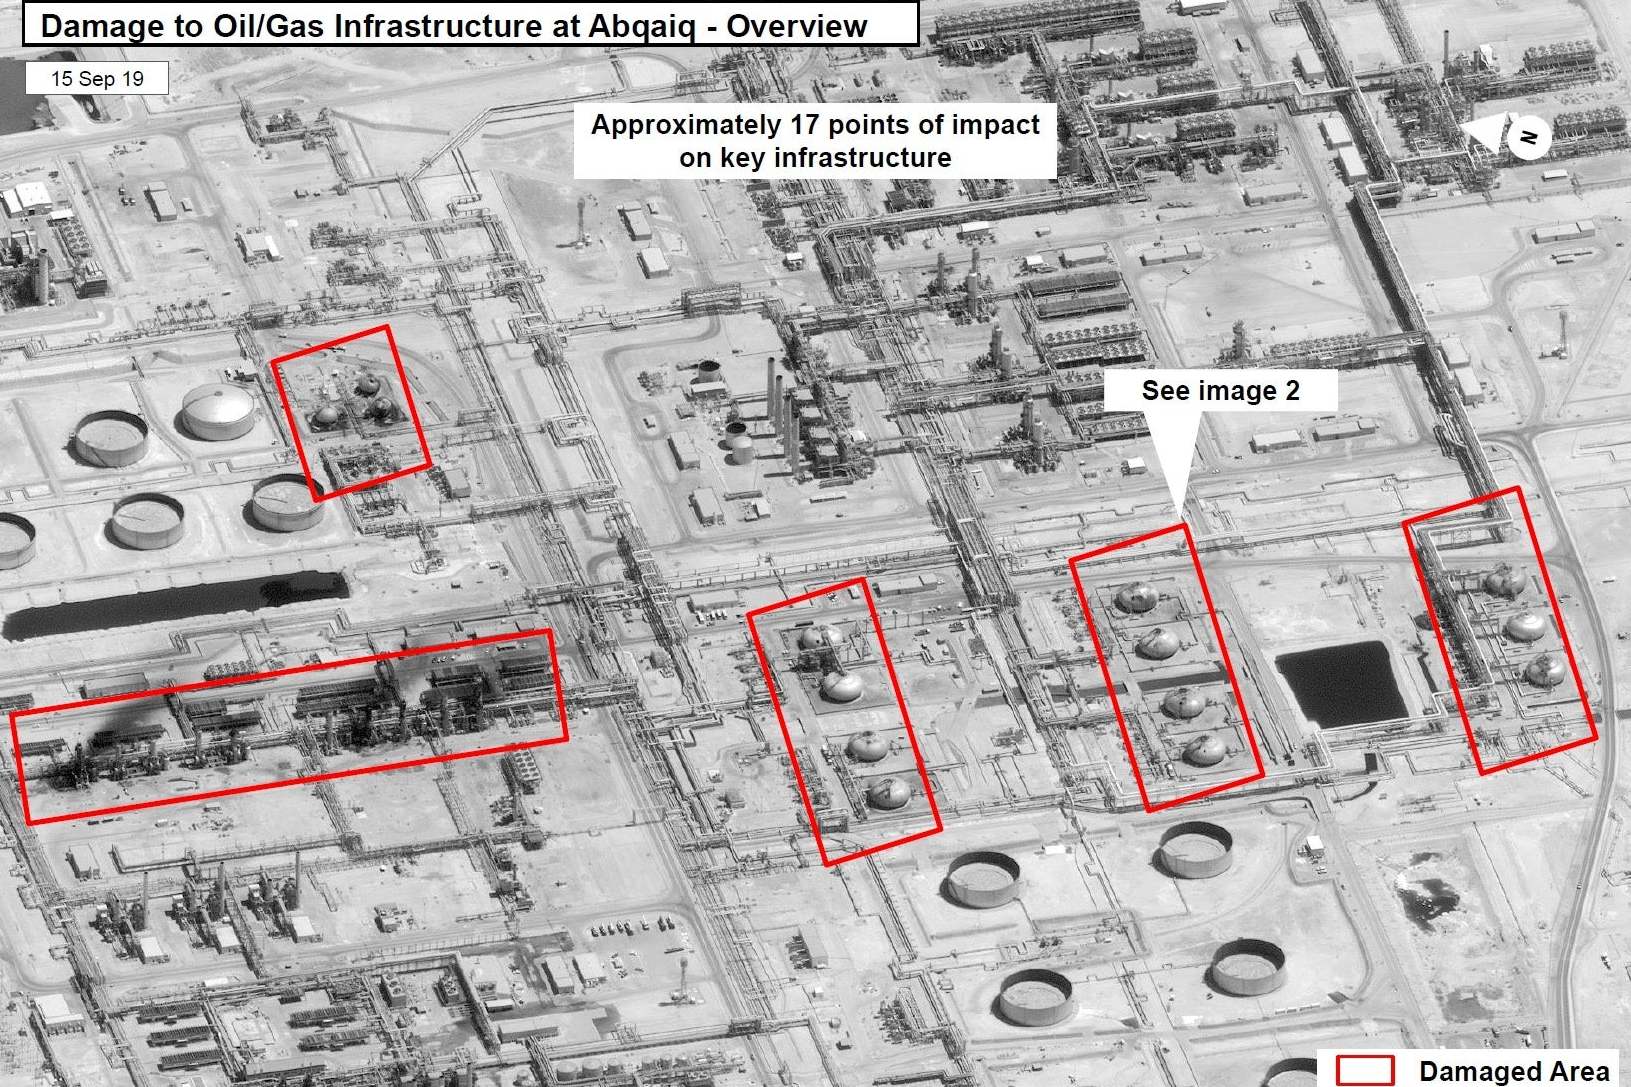 A satellite image showing damage to oil/gas Saudi Aramco infrastructure at Abqaiq, in Saudi Arabia in this handout picture released by the US Government